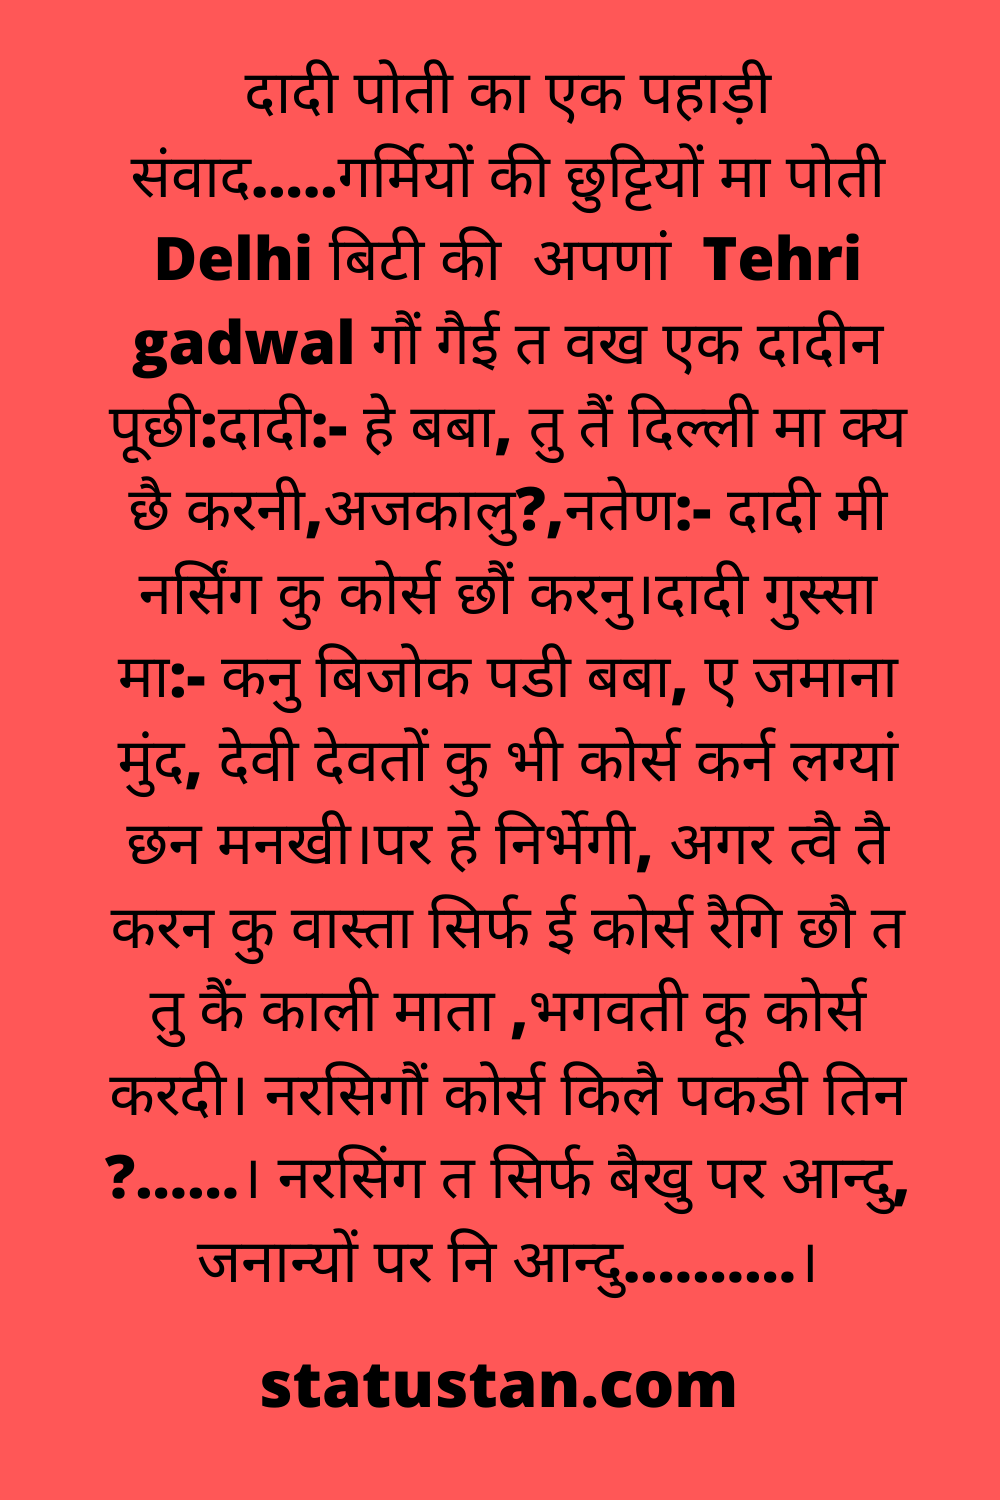 #{"id":204,"_id":"61f3f785e0f744570541c0fb","name":"garhwali-jokes","count":39,"data":"{\"_id\":{\"$oid\":\"61f3f785e0f744570541c0fb\"},\"id\":\"178\",\"name\":\"garhwali-jokes\",\"created_at\":\"2020-11-04-16:30:21\",\"updated_at\":\"2020-11-04-16:30:21\",\"updatedAt\":{\"$date\":\"2022-01-28T14:33:44.903Z\"},\"count\":39}","deleted_at":null,"created_at":"2020-11-04T04:30:21.000000Z","updated_at":"2020-11-04T04:30:21.000000Z","merge_with":null,"pivot":{"taggable_id":38,"tag_id":204,"taggable_type":"App\\Models\\Joke"}}, #{"id":207,"_id":"61f3f785e0f744570541c0fe","name":"garhwali-chutkule","count":40,"data":"{\"_id\":{\"$oid\":\"61f3f785e0f744570541c0fe\"},\"id\":\"181\",\"name\":\"garhwali-chutkule\",\"created_at\":\"2020-11-04-16:30:21\",\"updated_at\":\"2020-11-04-16:30:21\",\"updatedAt\":{\"$date\":\"2022-01-28T14:33:44.903Z\"},\"count\":40}","deleted_at":null,"created_at":"2020-11-04T04:30:21.000000Z","updated_at":"2020-11-04T04:30:21.000000Z","merge_with":null,"pivot":{"taggable_id":38,"tag_id":207,"taggable_type":"App\\Models\\Joke"}}, #{"id":218,"_id":"61f3f785e0f744570541c109","name":"garhwali-status","count":27,"data":"{\"_id\":{\"$oid\":\"61f3f785e0f744570541c109\"},\"id\":\"192\",\"name\":\"garhwali-status\",\"created_at\":\"2020-11-05-12:43:58\",\"updated_at\":\"2020-11-05-12:43:58\",\"updatedAt\":{\"$date\":\"2022-01-28T14:33:44.902Z\"},\"count\":27}","deleted_at":null,"created_at":"2020-11-05T12:43:58.000000Z","updated_at":"2020-11-05T12:43:58.000000Z","merge_with":null,"pivot":{"taggable_id":38,"tag_id":218,"taggable_type":"App\\Models\\Joke"}}, #{"id":206,"_id":"61f3f785e0f744570541c0fd","name":"garhwali-funny-jokes","count":23,"data":"{\"_id\":{\"$oid\":\"61f3f785e0f744570541c0fd\"},\"id\":\"180\",\"name\":\"garhwali-funny-jokes\",\"created_at\":\"2020-11-04-16:30:21\",\"updated_at\":\"2020-11-04-16:30:21\",\"updatedAt\":{\"$date\":\"2022-01-28T14:33:44.903Z\"},\"count\":23}","deleted_at":null,"created_at":"2020-11-04T04:30:21.000000Z","updated_at":"2020-11-04T04:30:21.000000Z","merge_with":null,"pivot":{"taggable_id":38,"tag_id":206,"taggable_type":"App\\Models\\Joke"}}